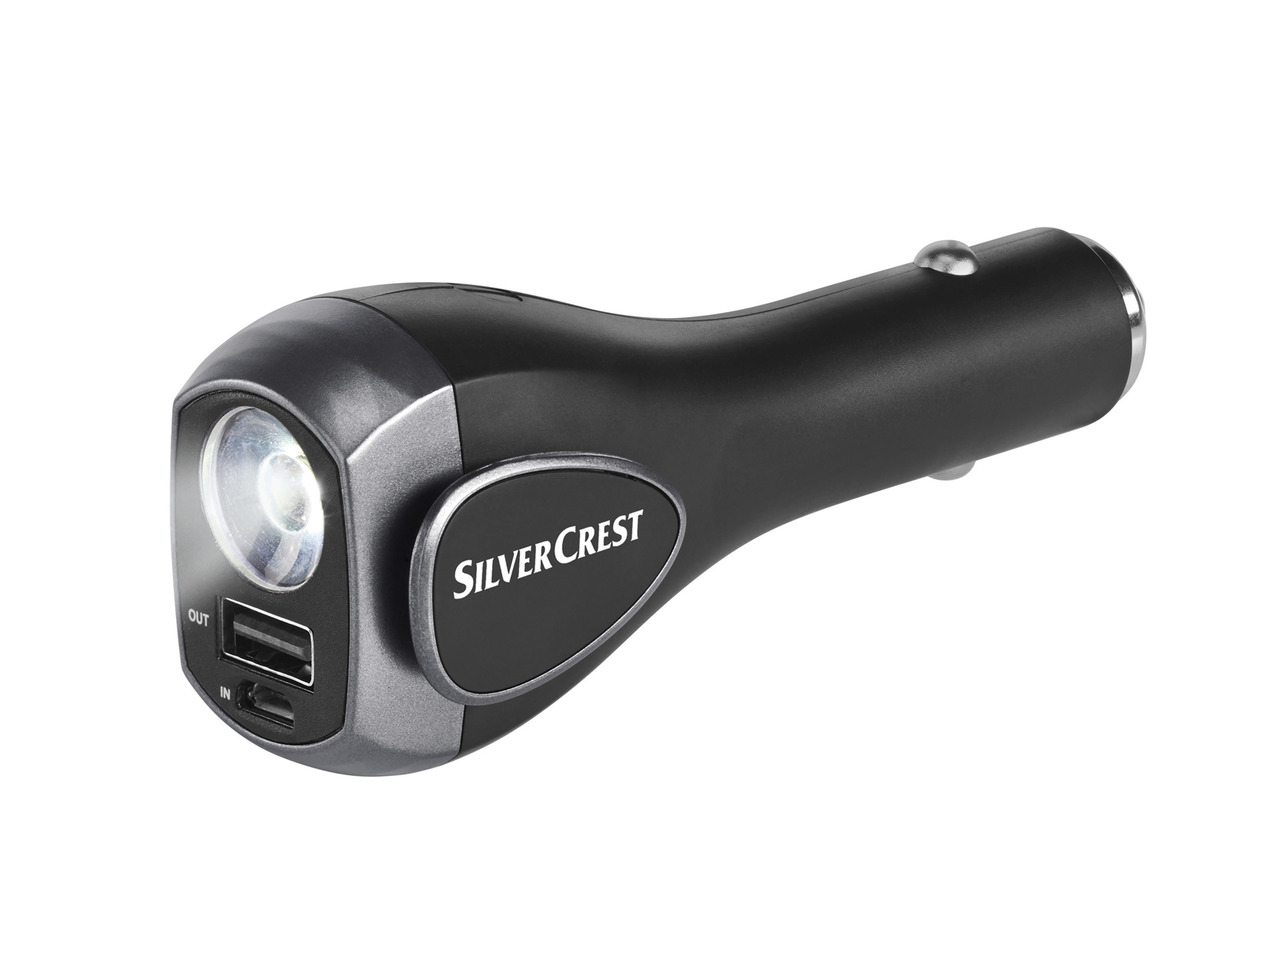 Silvercrest In-Car Charger with Emergency Functions1